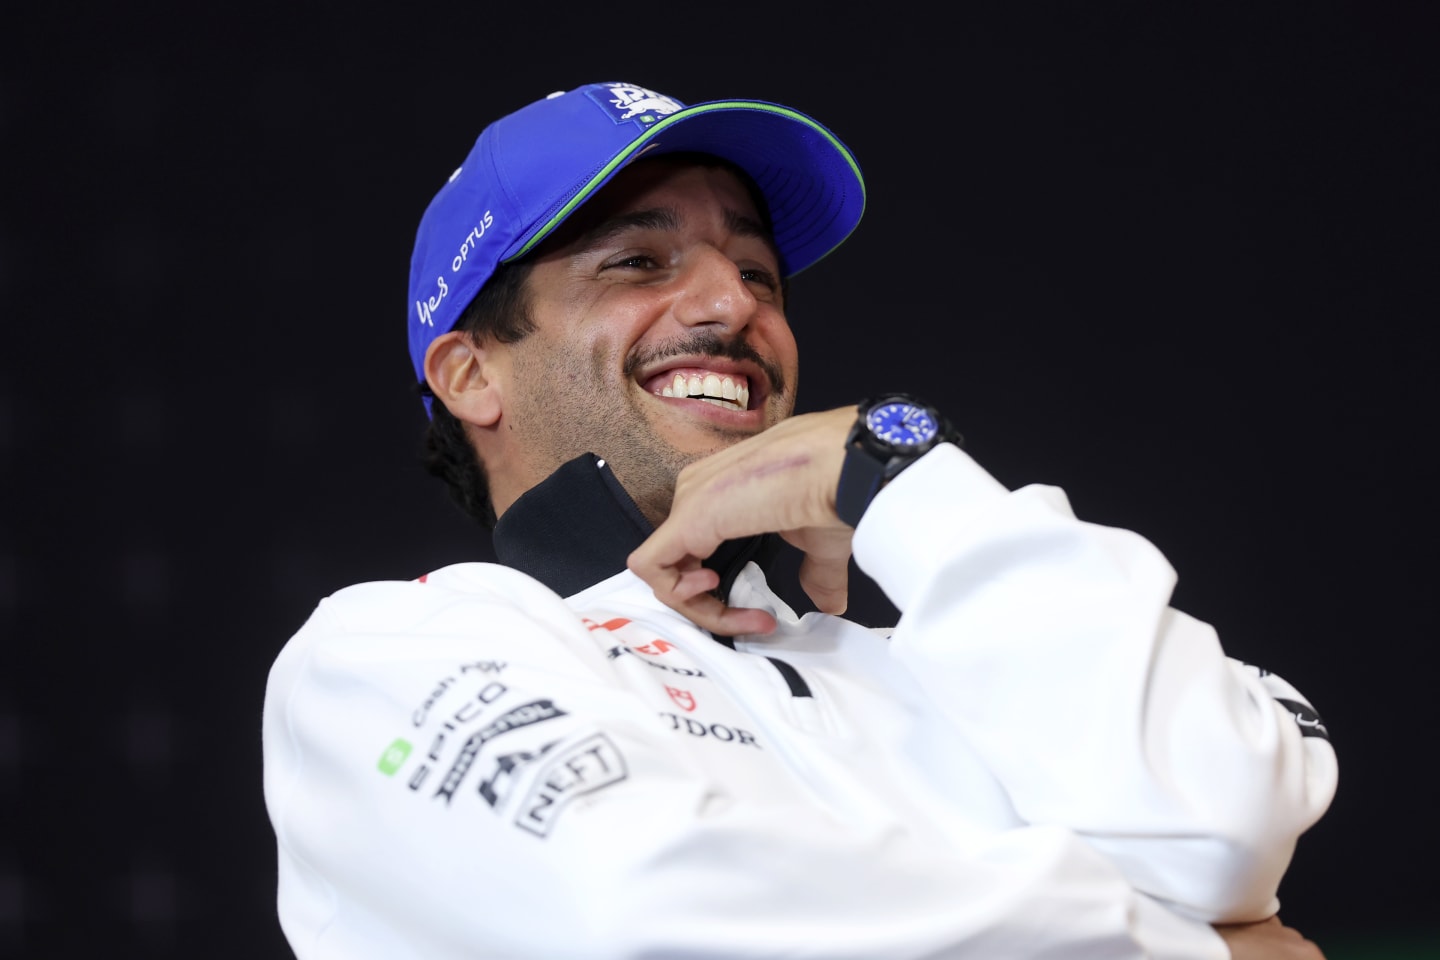 IMOLA, ITALY - MAY 16: Daniel Ricciardo of Australia and Visa Cash App RB attends the Drivers Press Conference during previews ahead of the F1 Grand Prix of Emilia-Romagna at Autodromo Enzo e Dino Ferrari Circuit on May 16, 2024 in Imola, Italy. (Photo by Lars Baron/Getty Images)